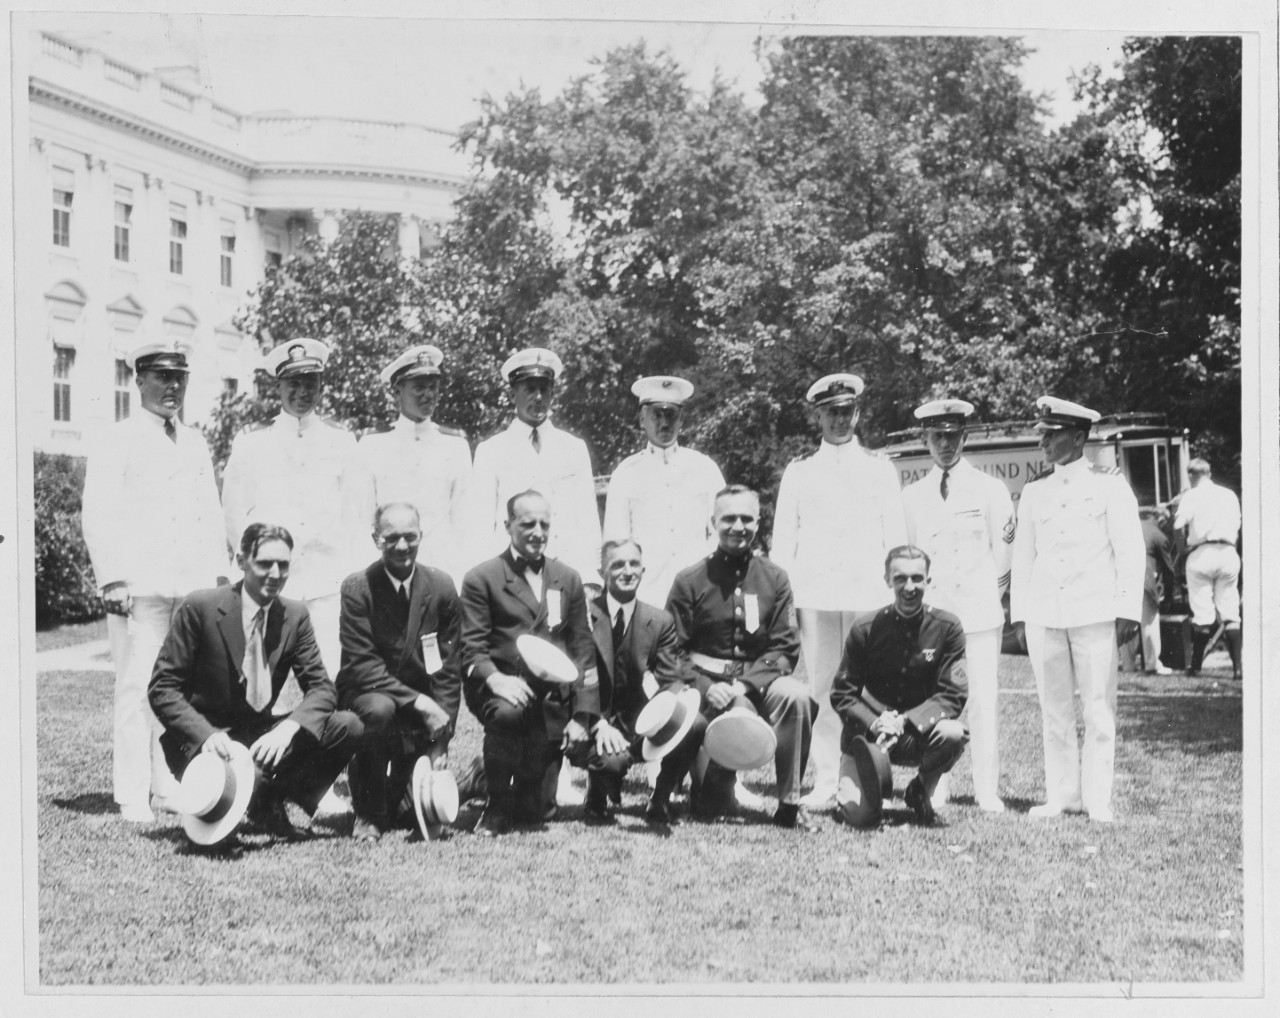 Members of the Byrd expedition.